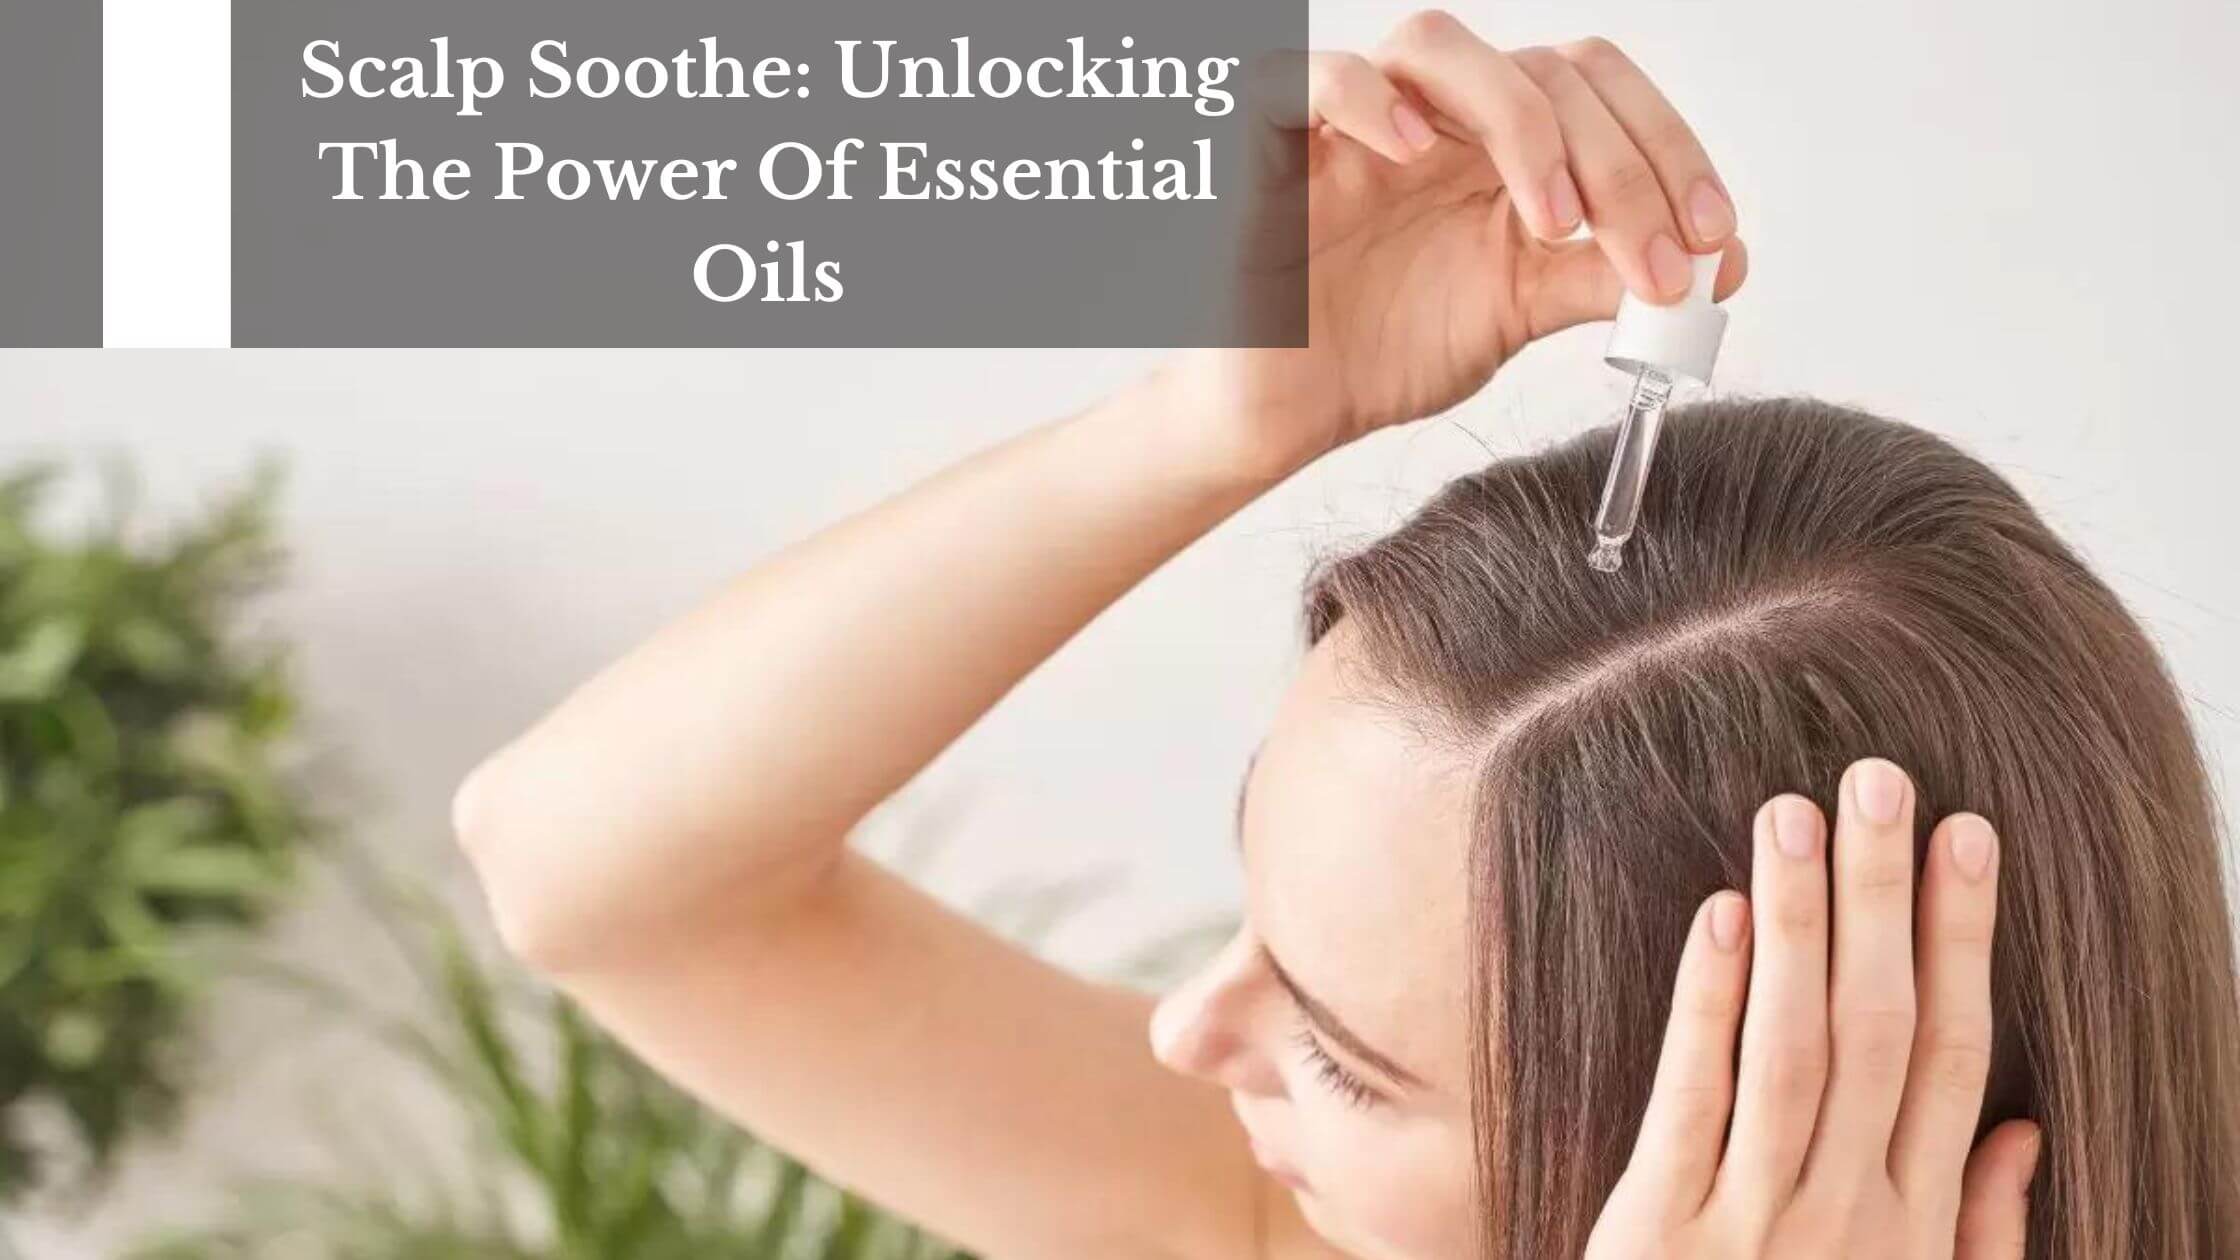 Scalp Soothe: Unlocking The Power Of Essential Oils